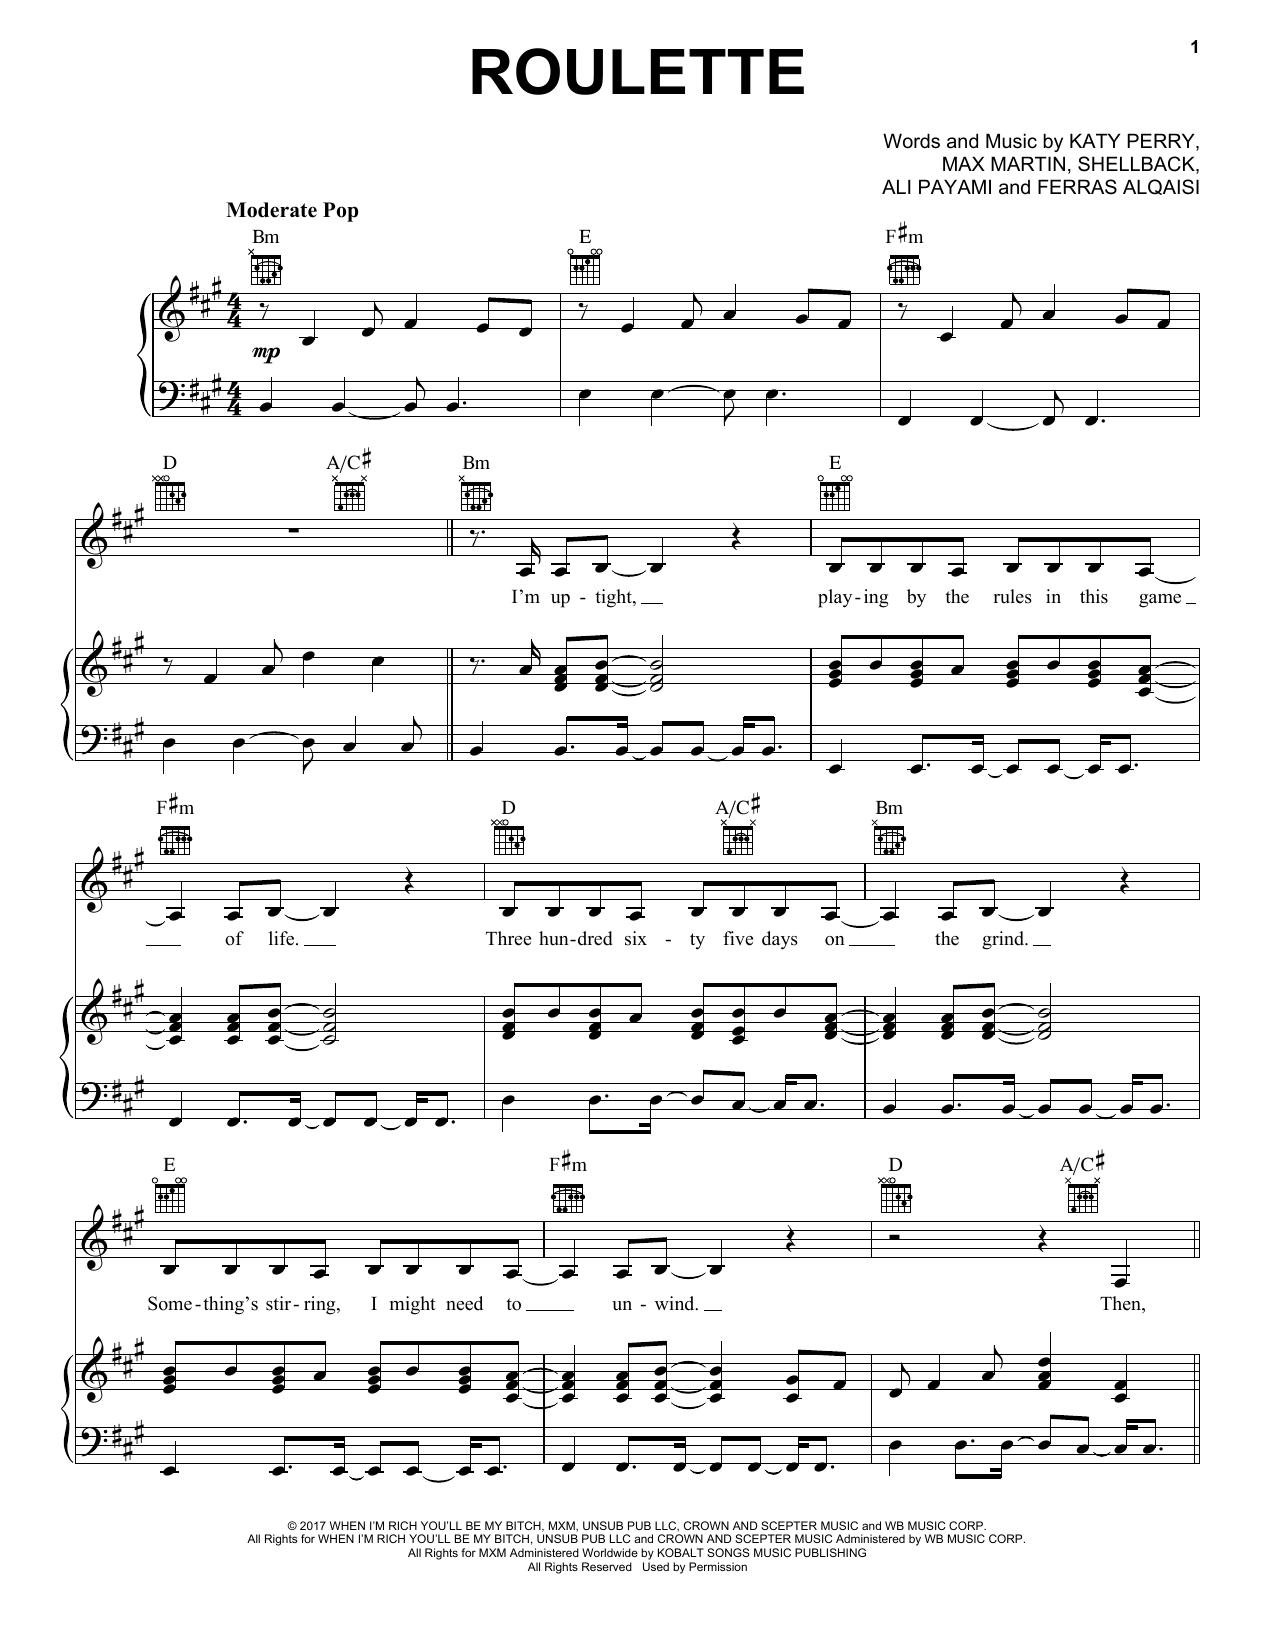 Download Katy Perry Roulette Sheet Music